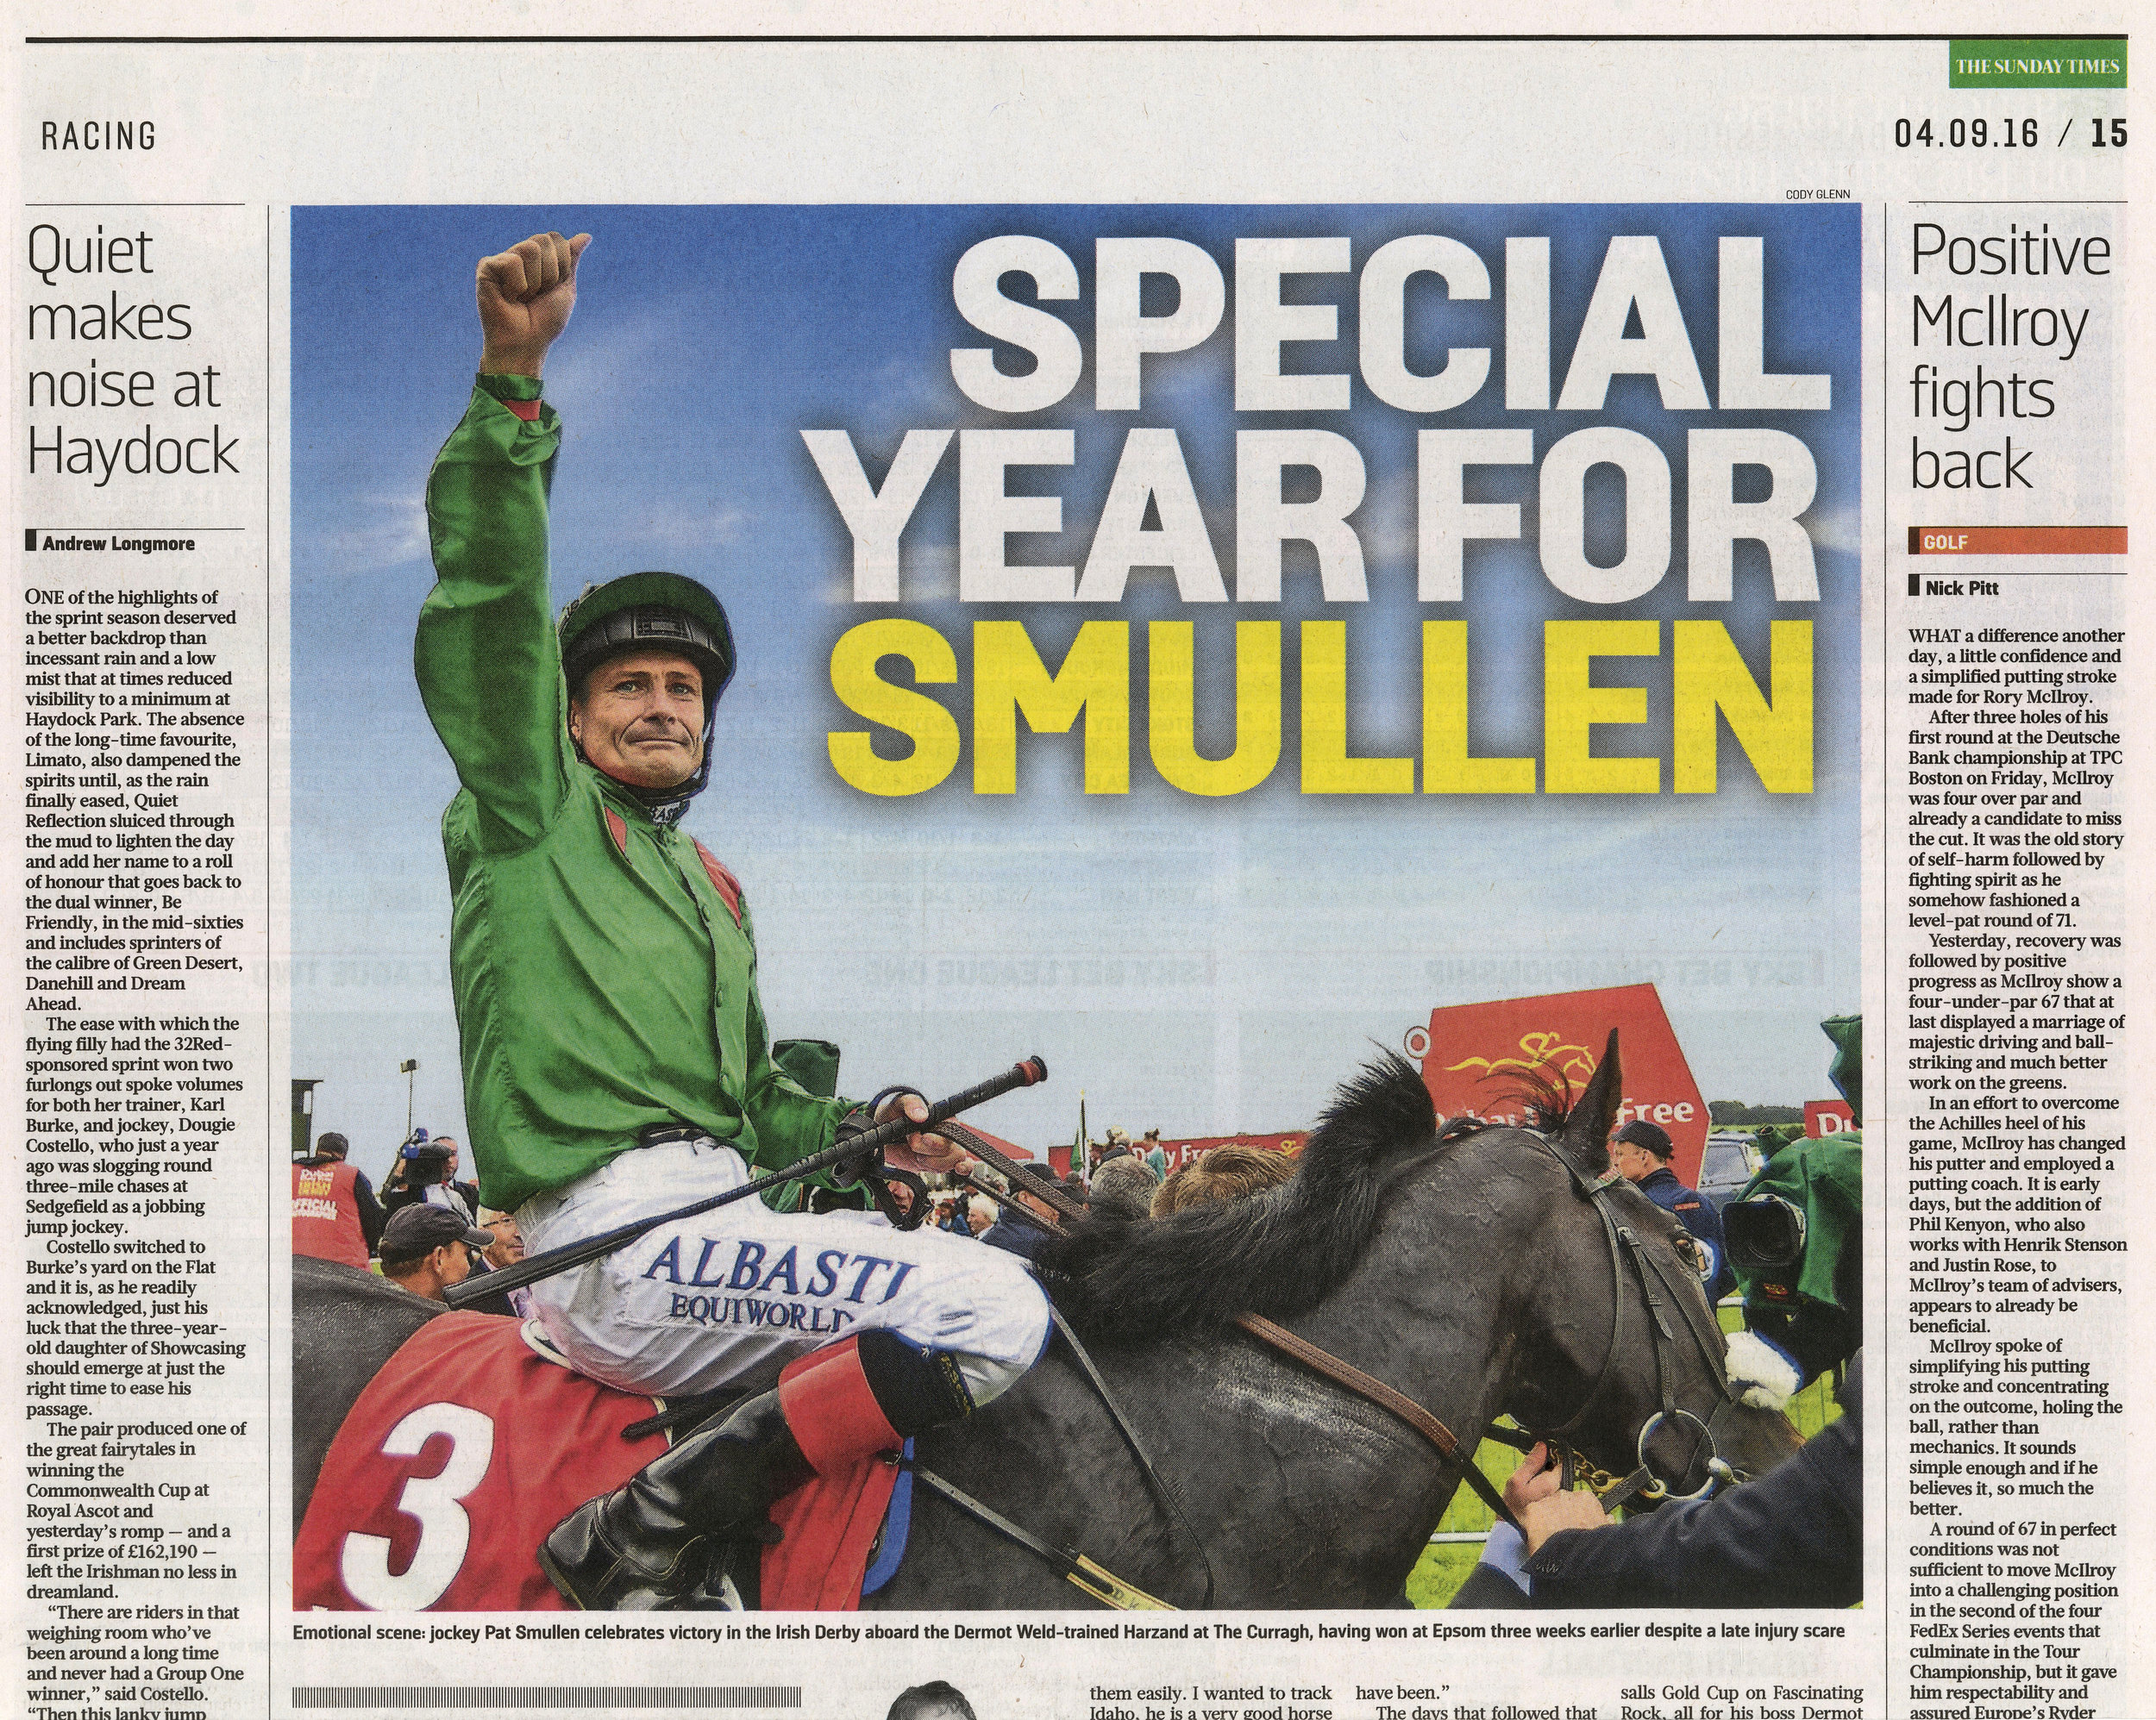  Jockey Pat Smullen celebrates winning the Irish Derby on Harzand at The Curragh September 4 2016  The Sunday Times  